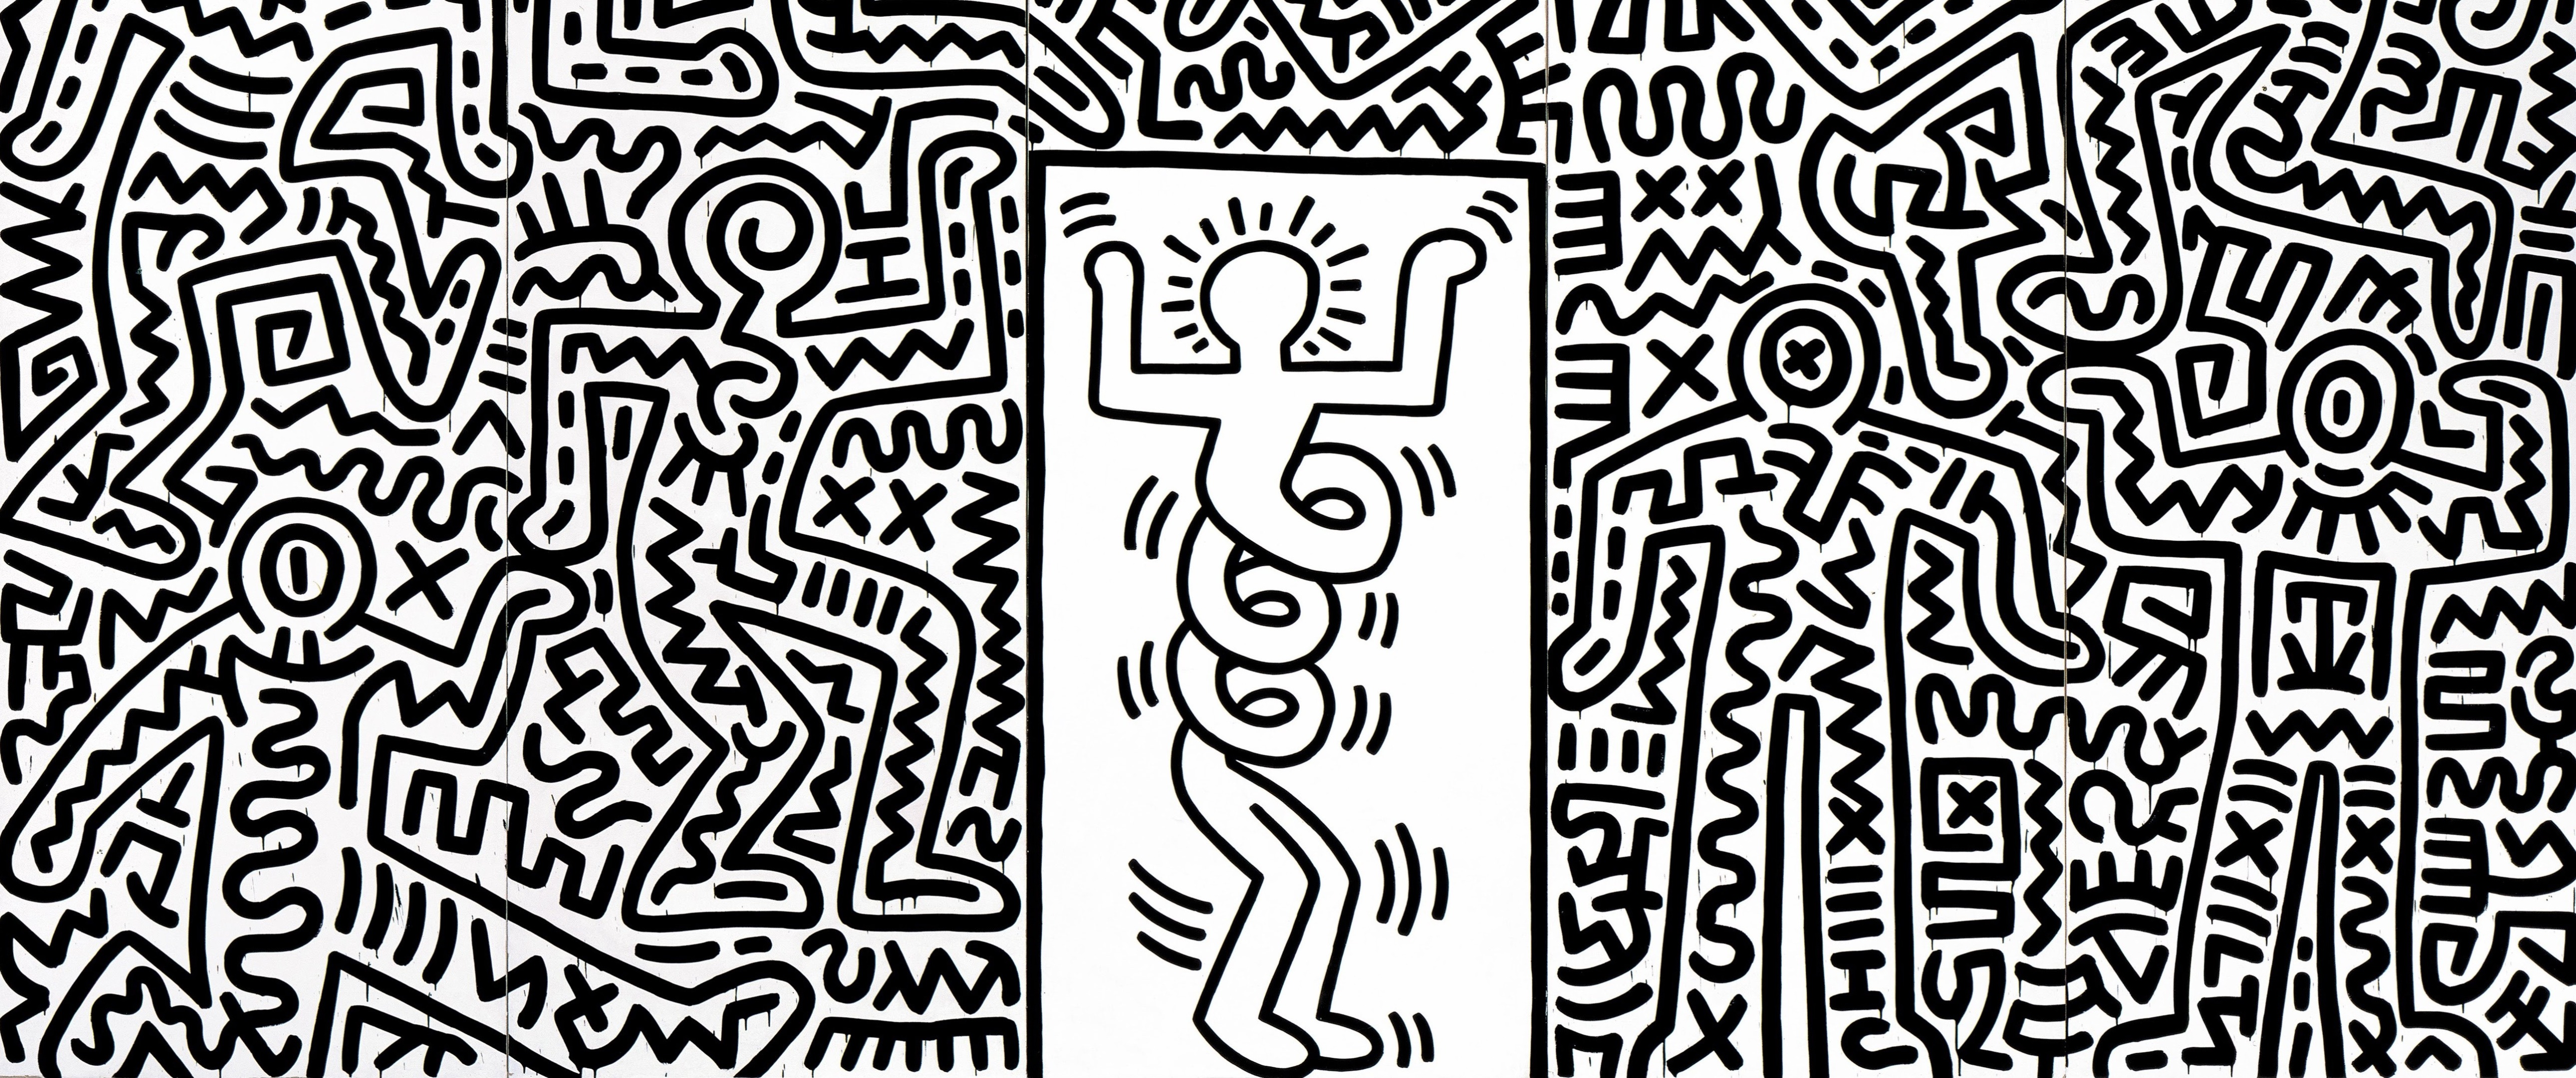 General 5160x2160 Keith Haring acrylic pop art cotton fabric drawing